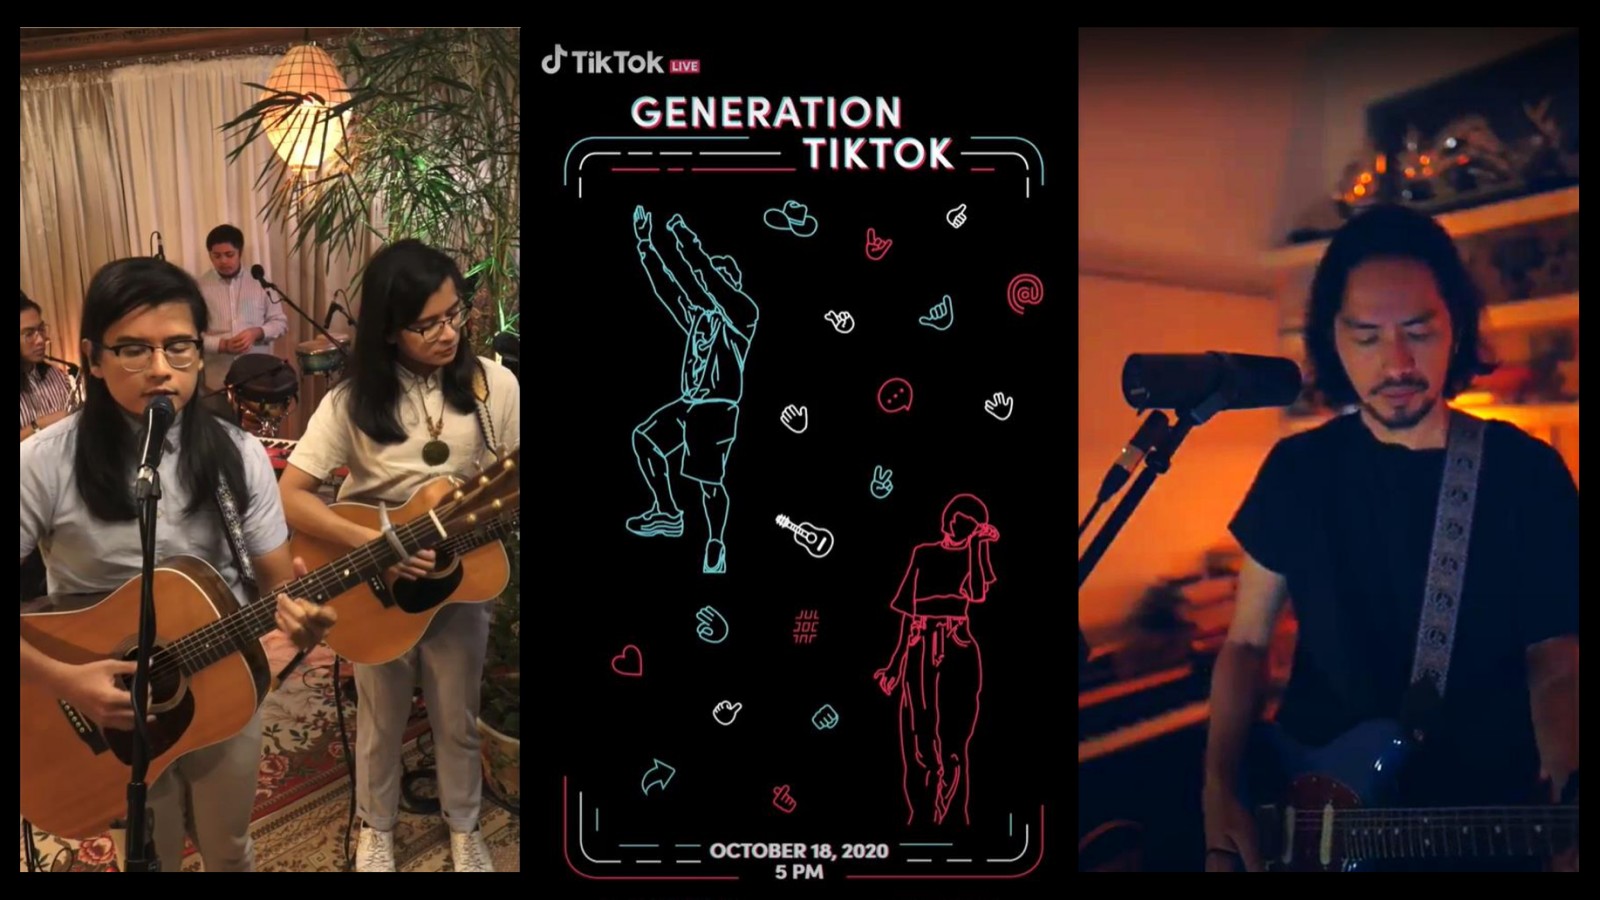 TikTok sends love to the Filipino community in free online concert celebrating content diversity and creative expression